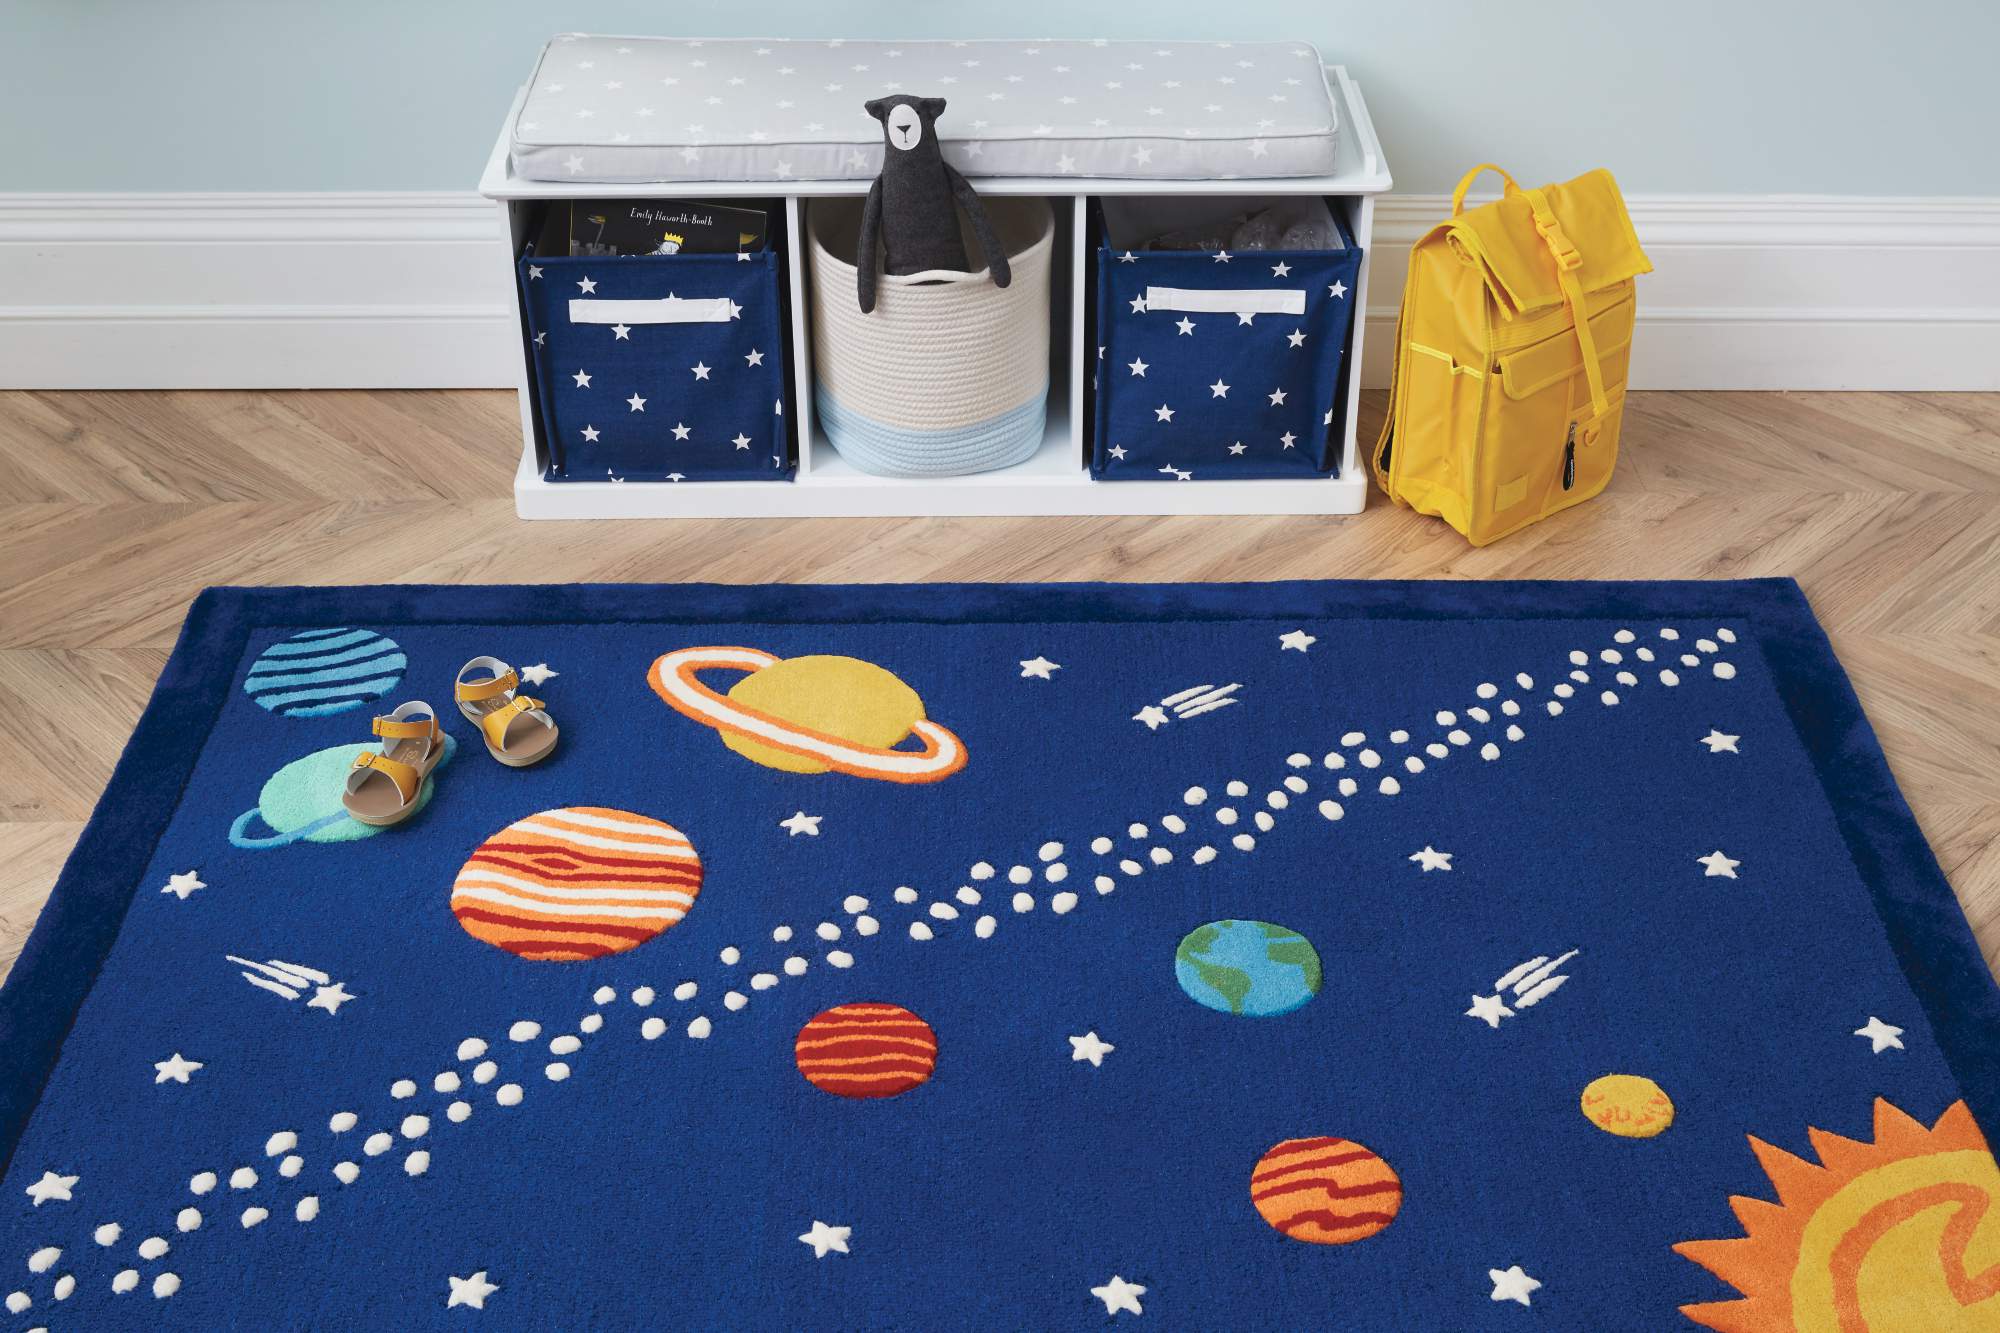 Work on those STEM skills with a space-themed children's bedroom